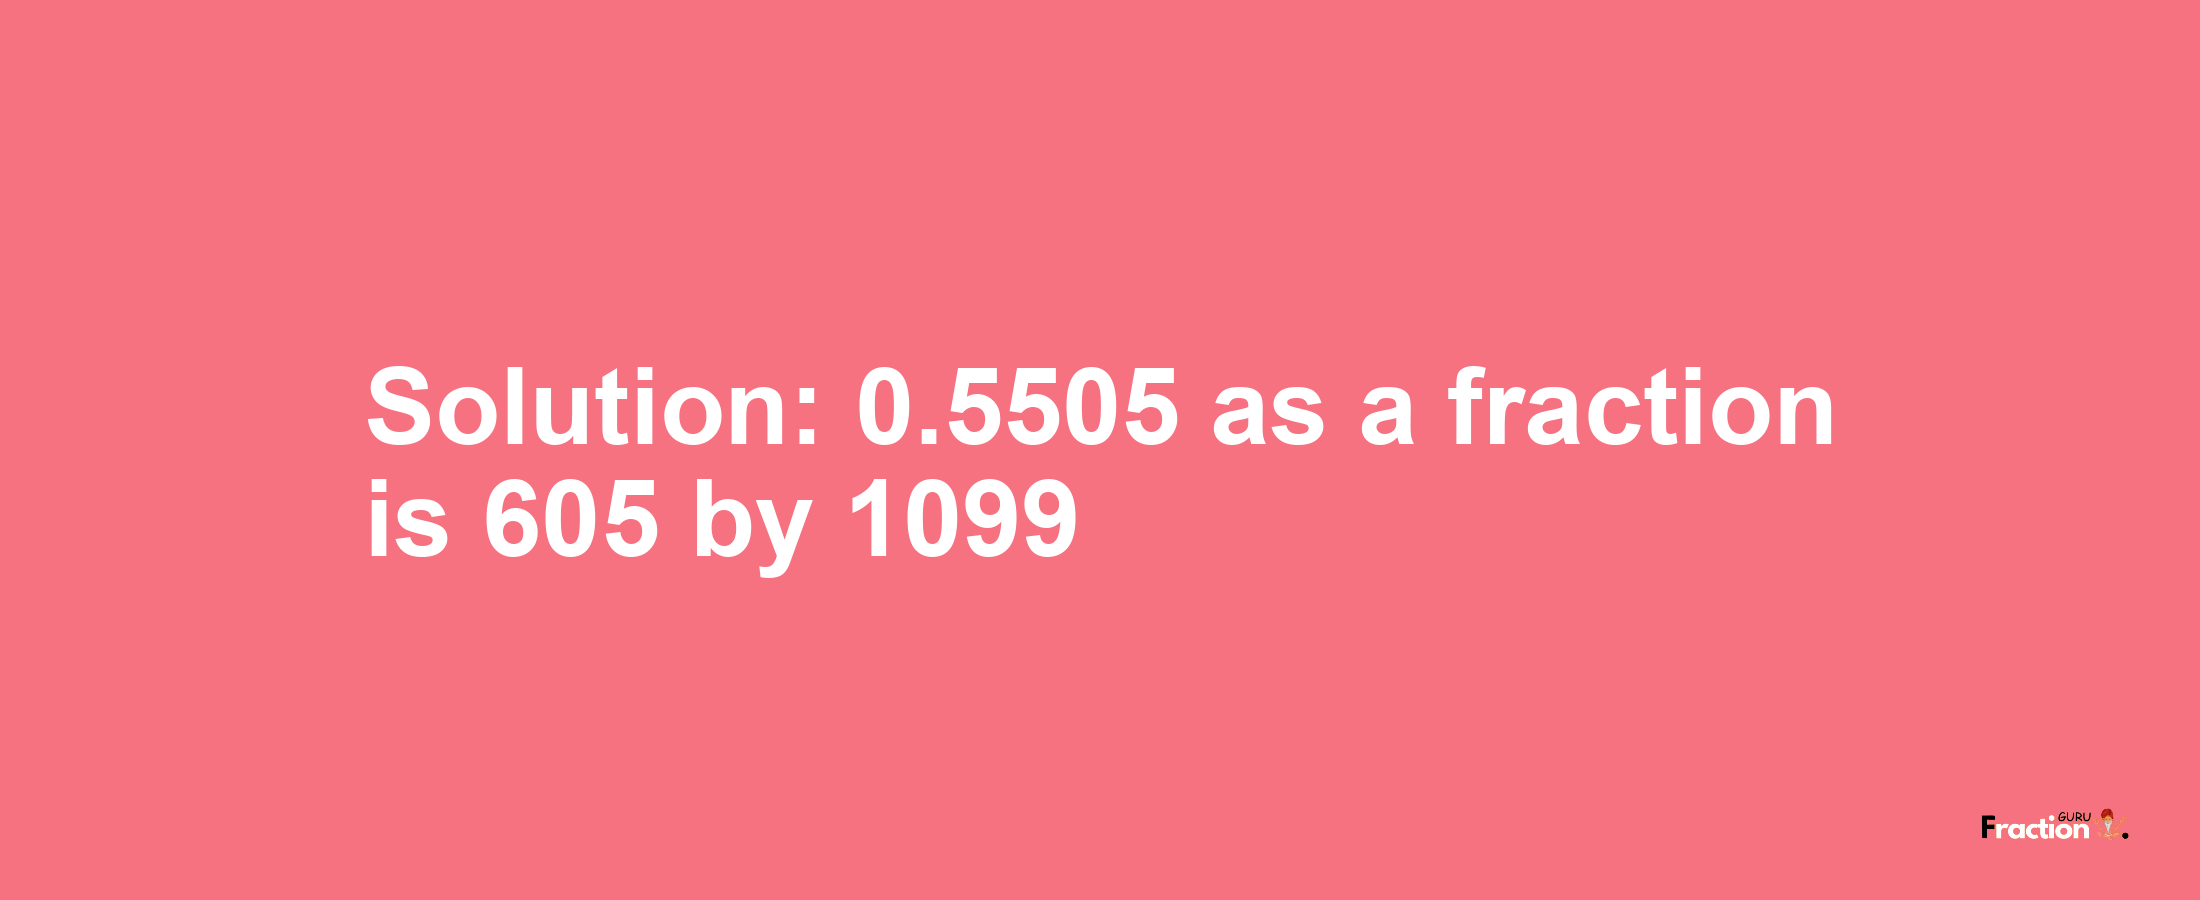 Solution:0.5505 as a fraction is 605/1099